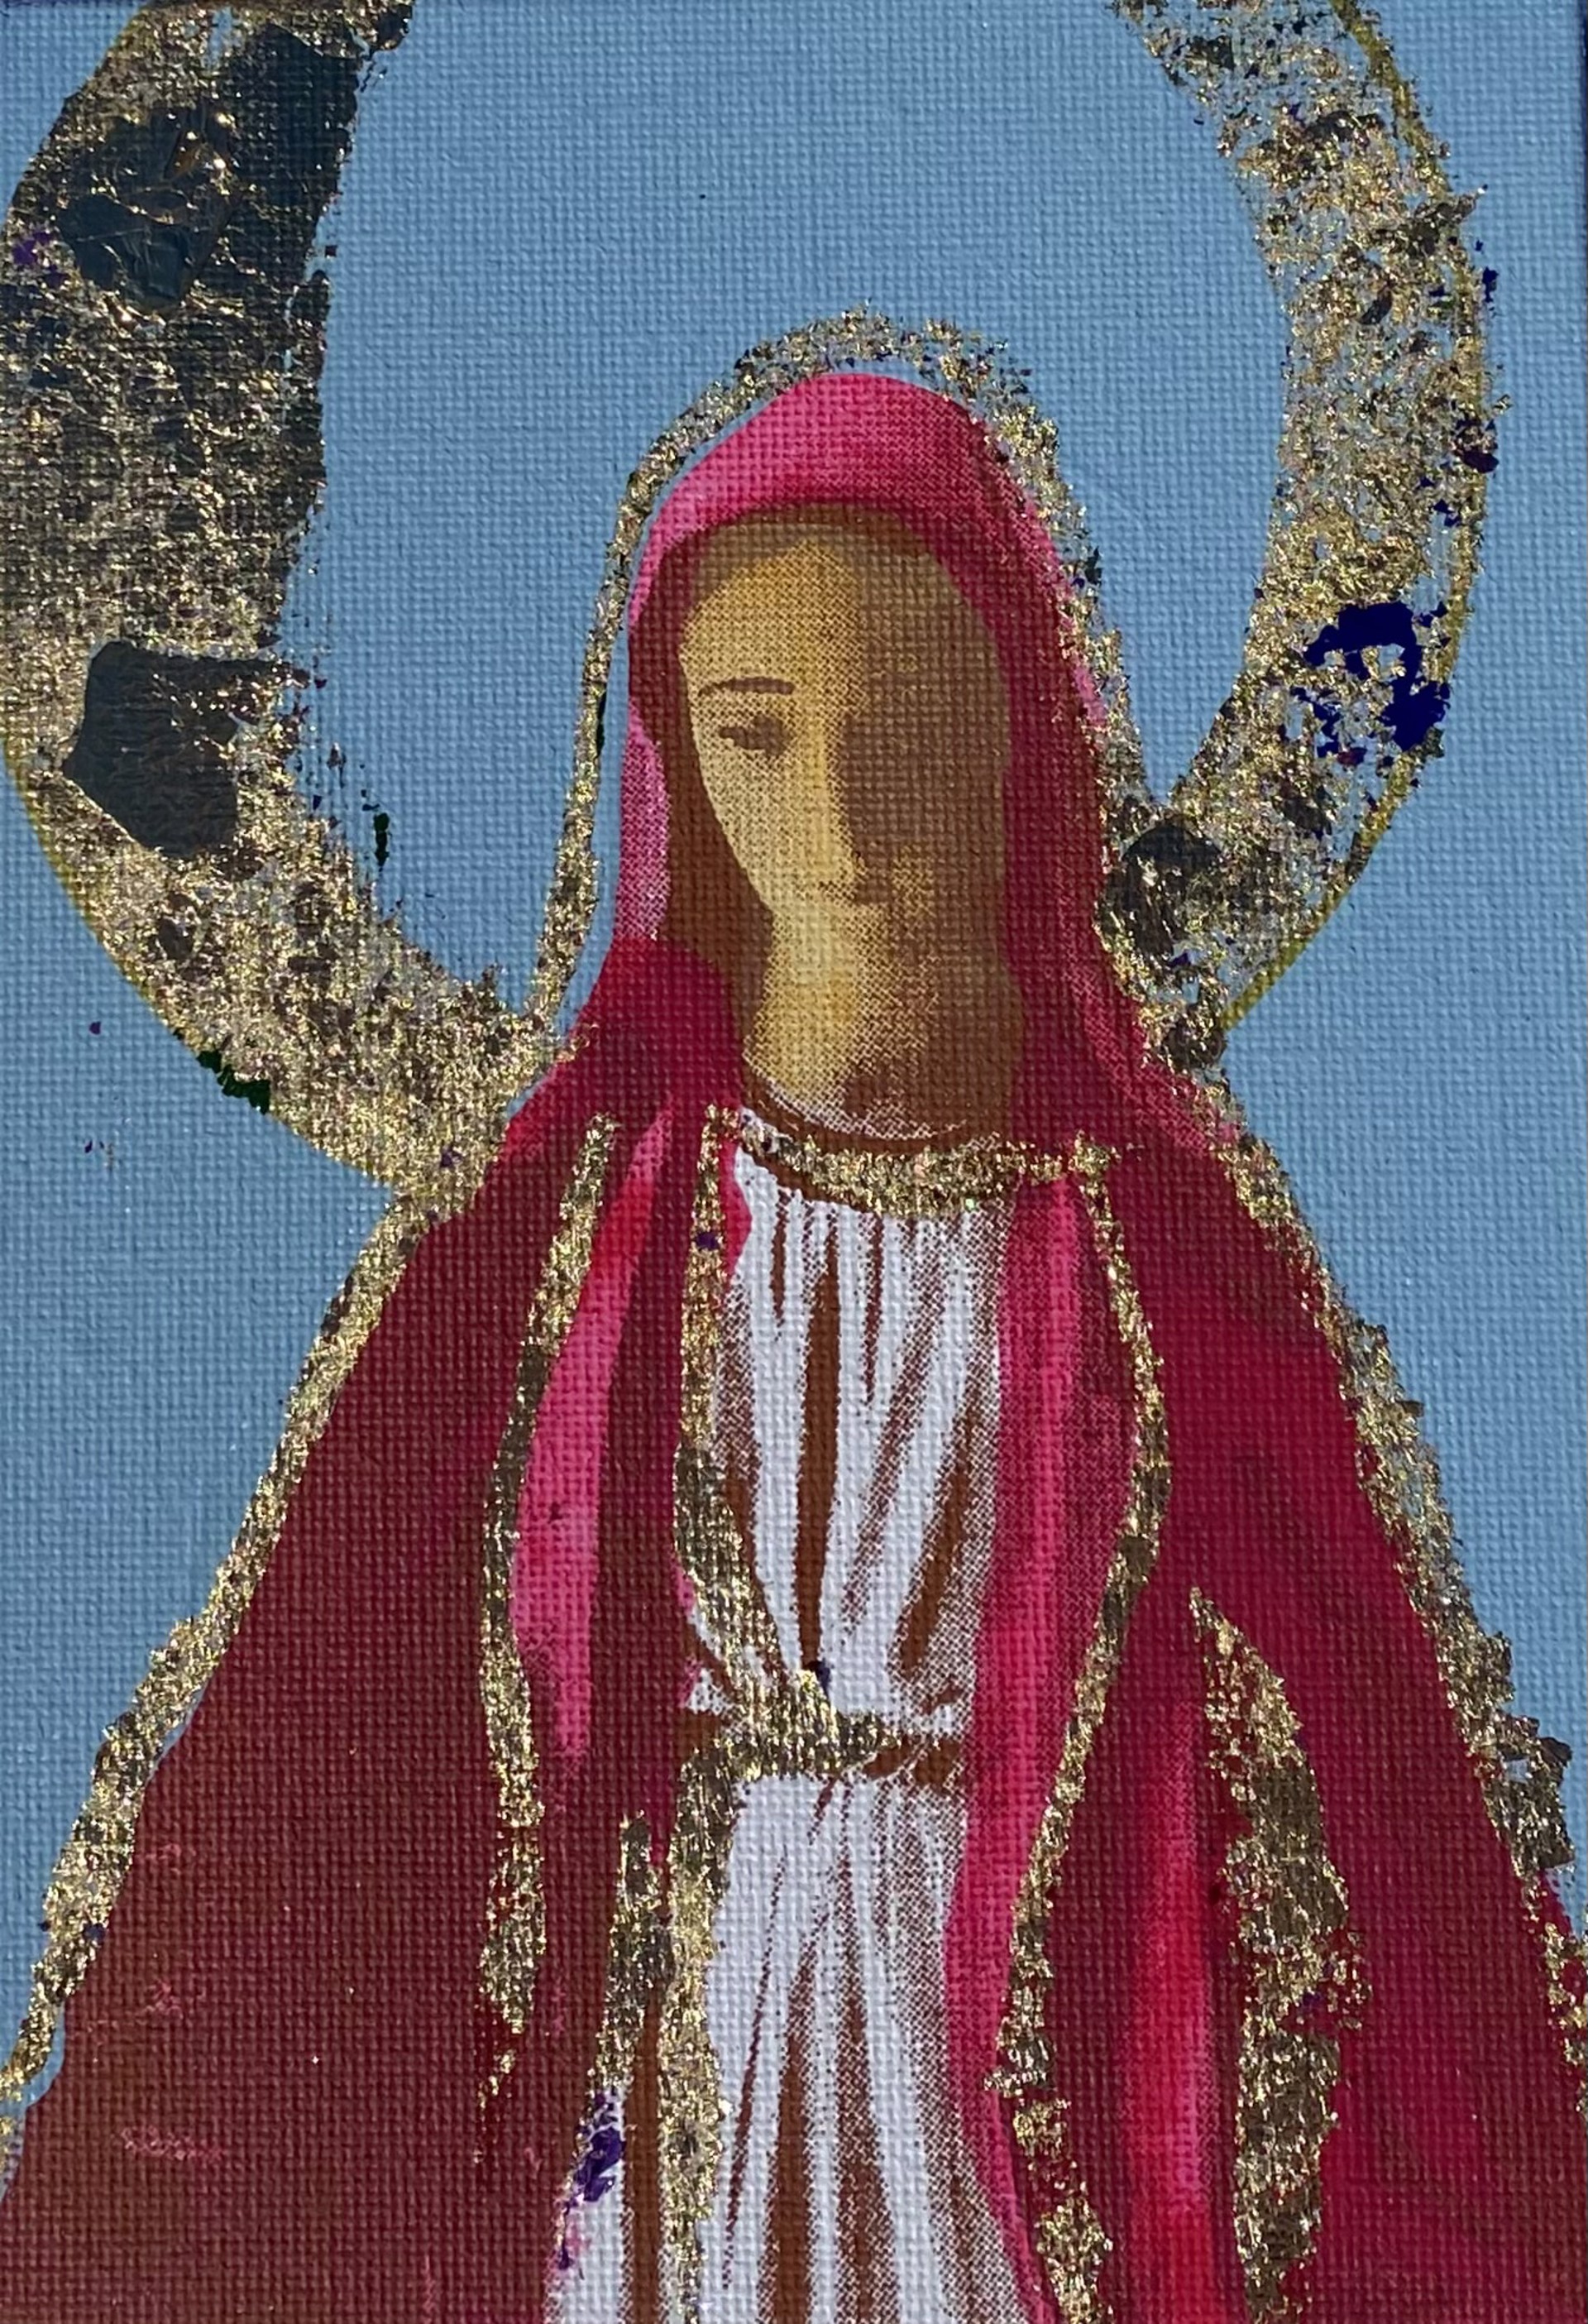 Hail Mary 17 by Megan Coonelly